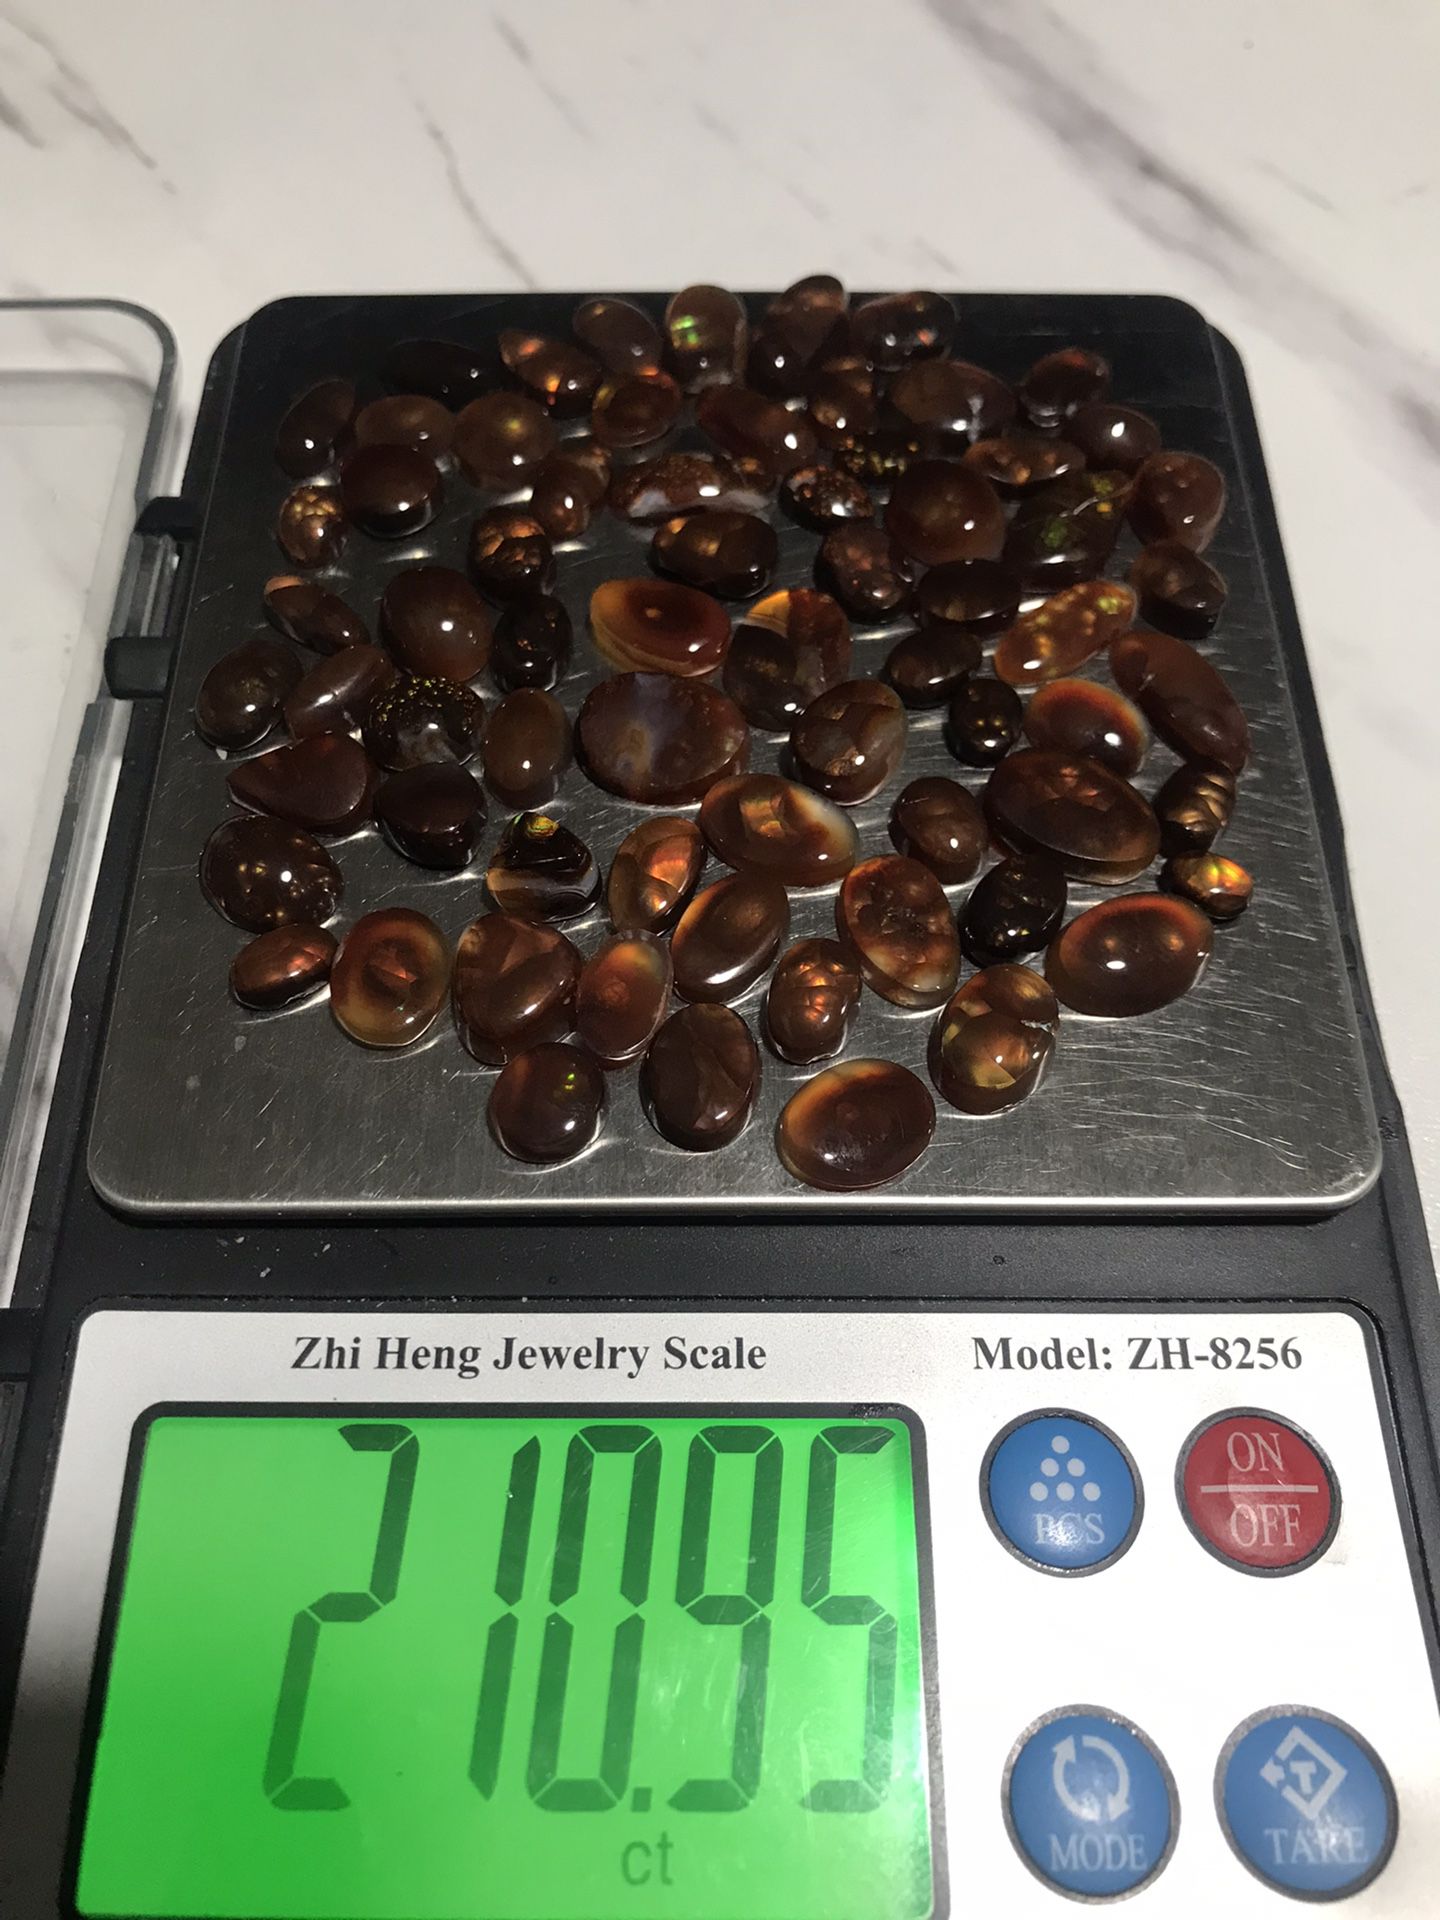 Fire Agate Cabachon Gemstones 210 Carats 